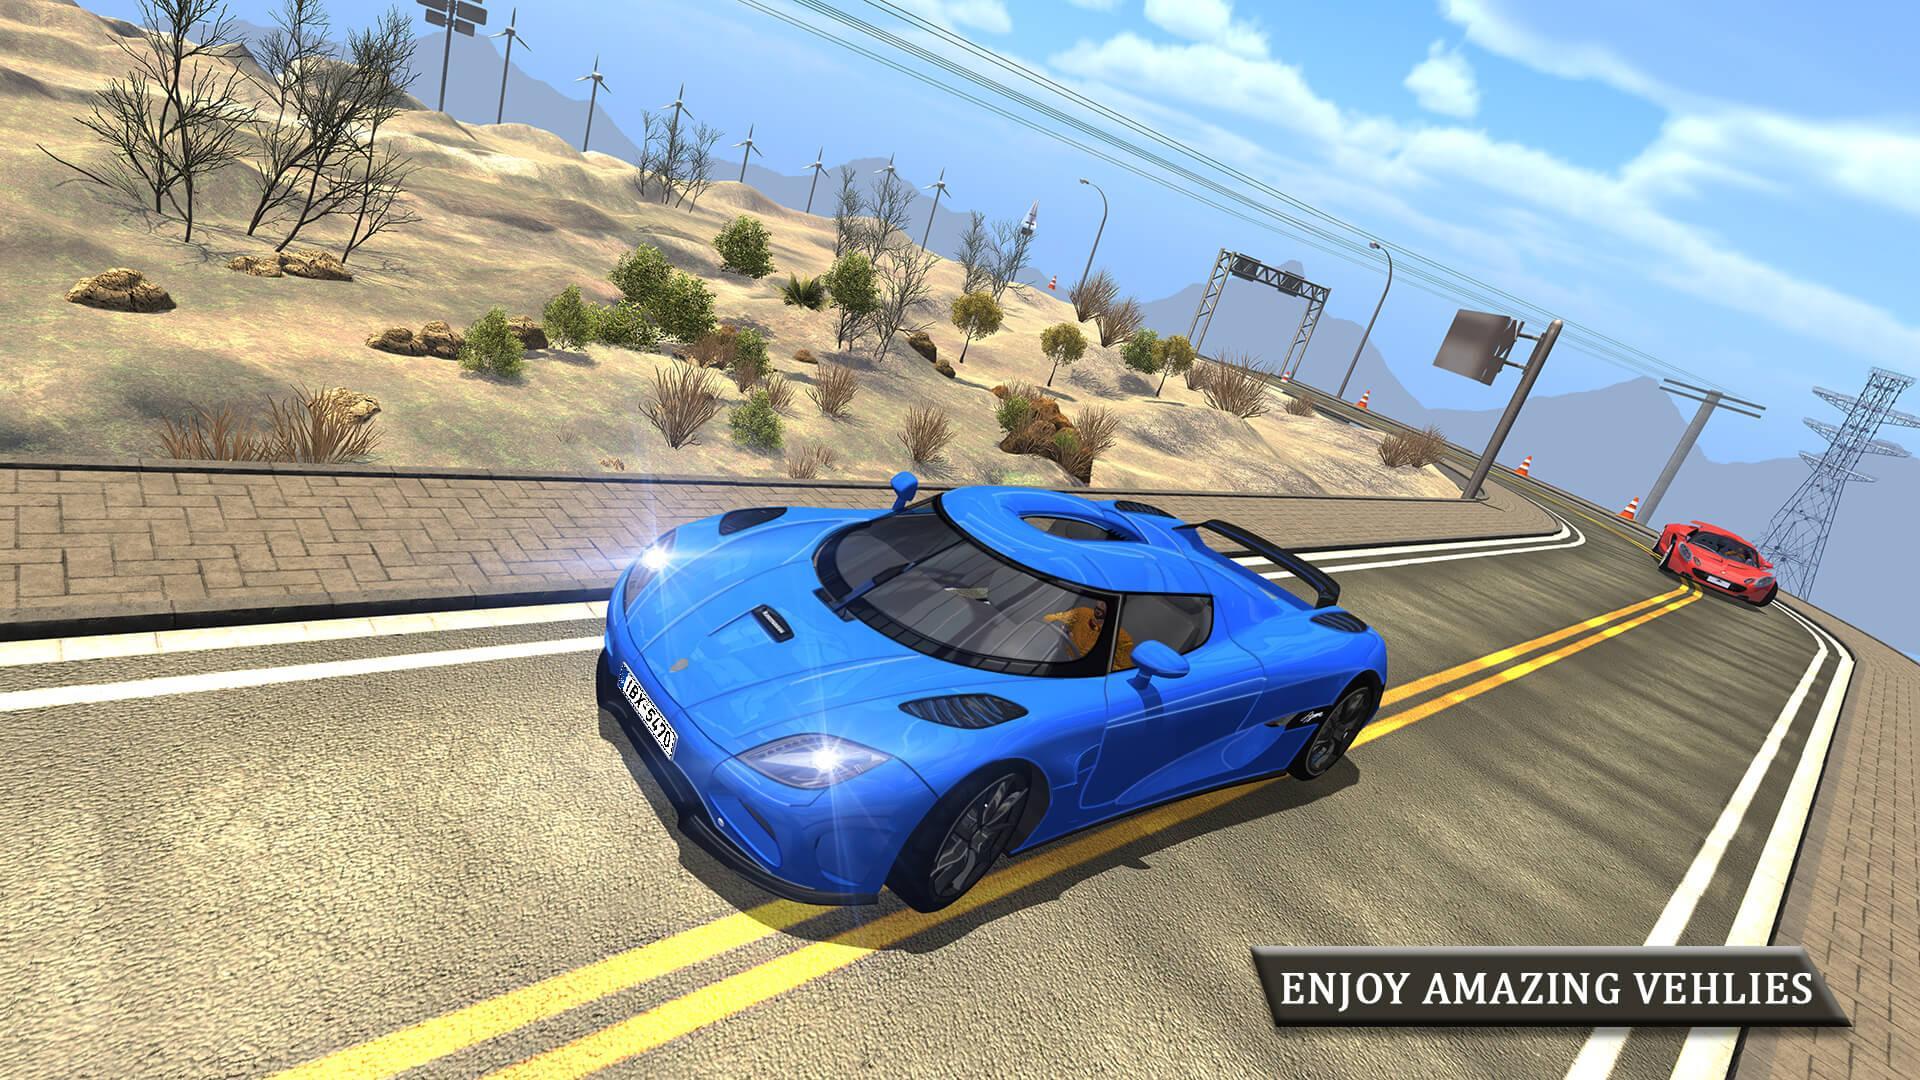 Agera Rs Car Drifting Game City Driving For Android Apk Download